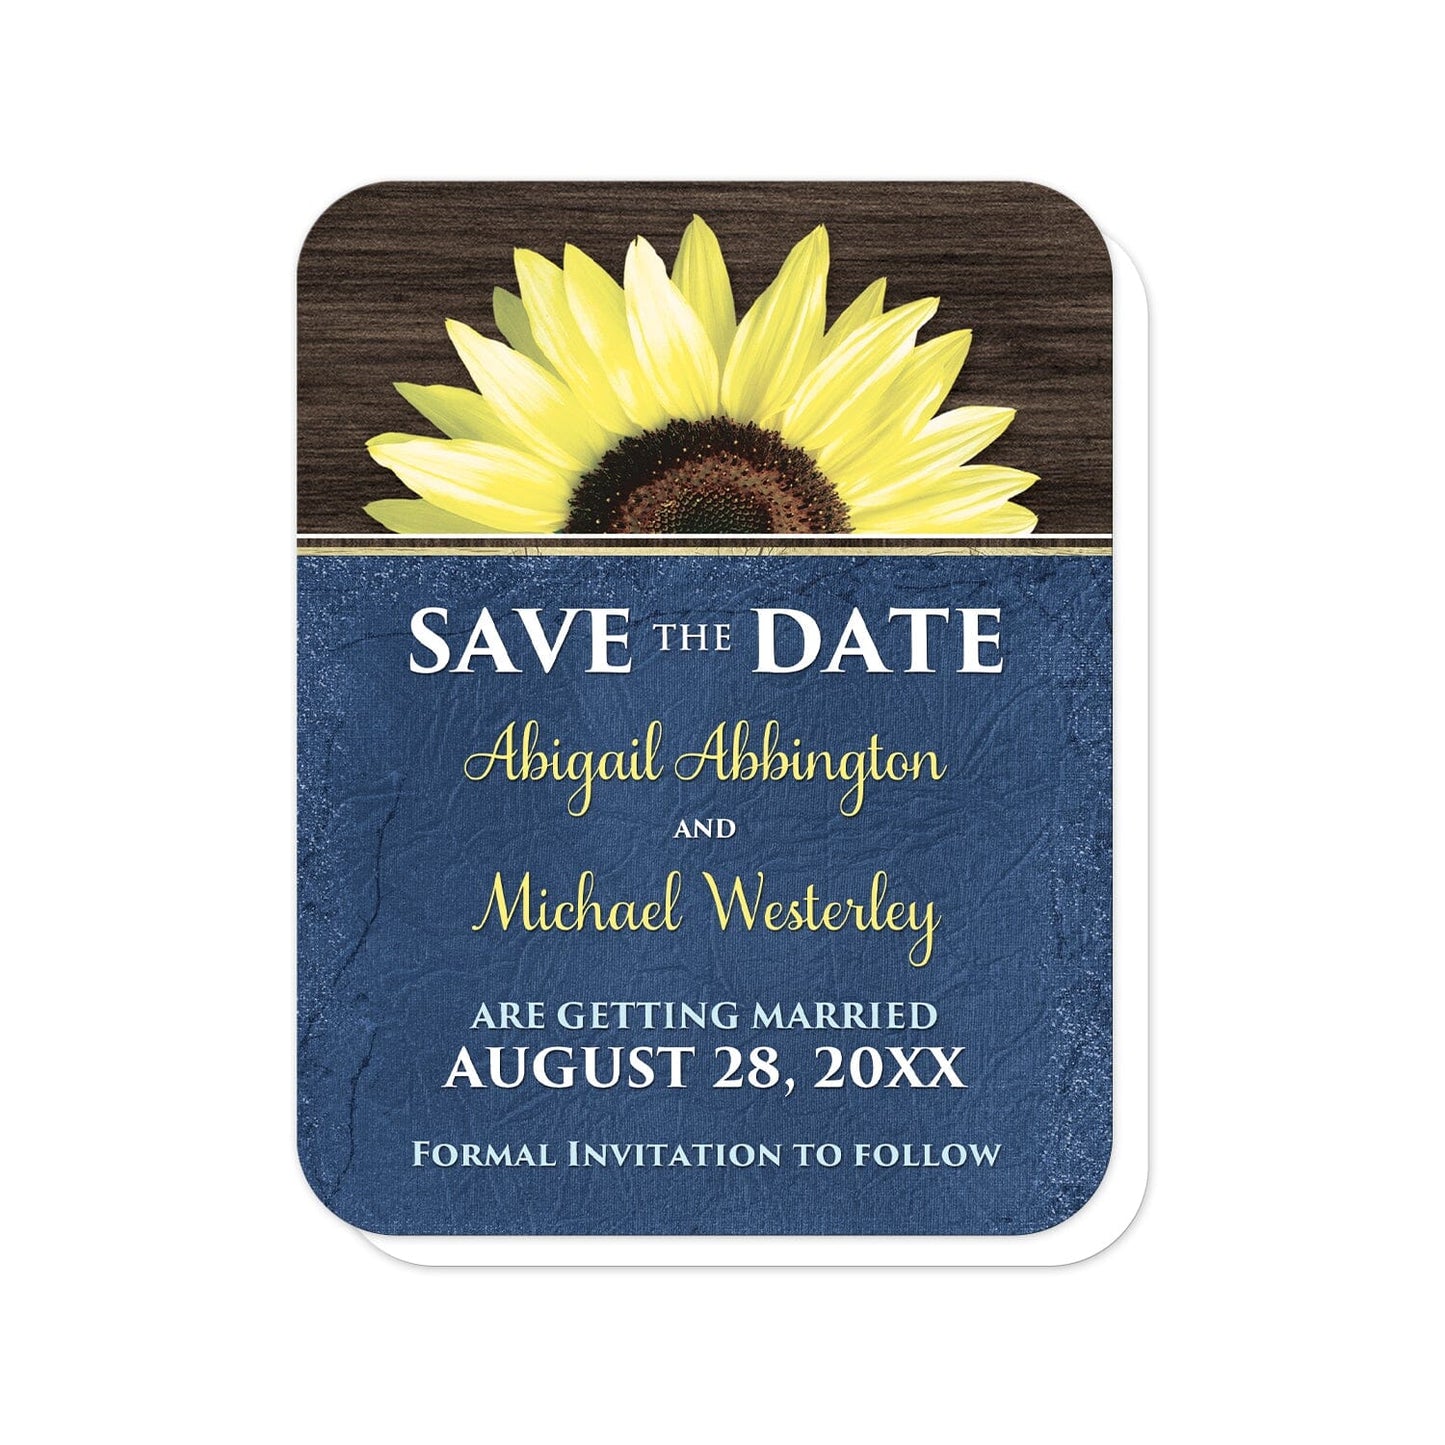 Rustic Sunflower with Blue Save the Date Cards (with rounded corners) at Artistically Invited. Country-inspired rustic sunflower with blue save the date cards featuring a vibrant bright yellow sunflower over a textured dark brown wood design along the top. Your personalized wedding date details are custom printed in yellow and white over a tattered blue cloth illustration below the sunflower.